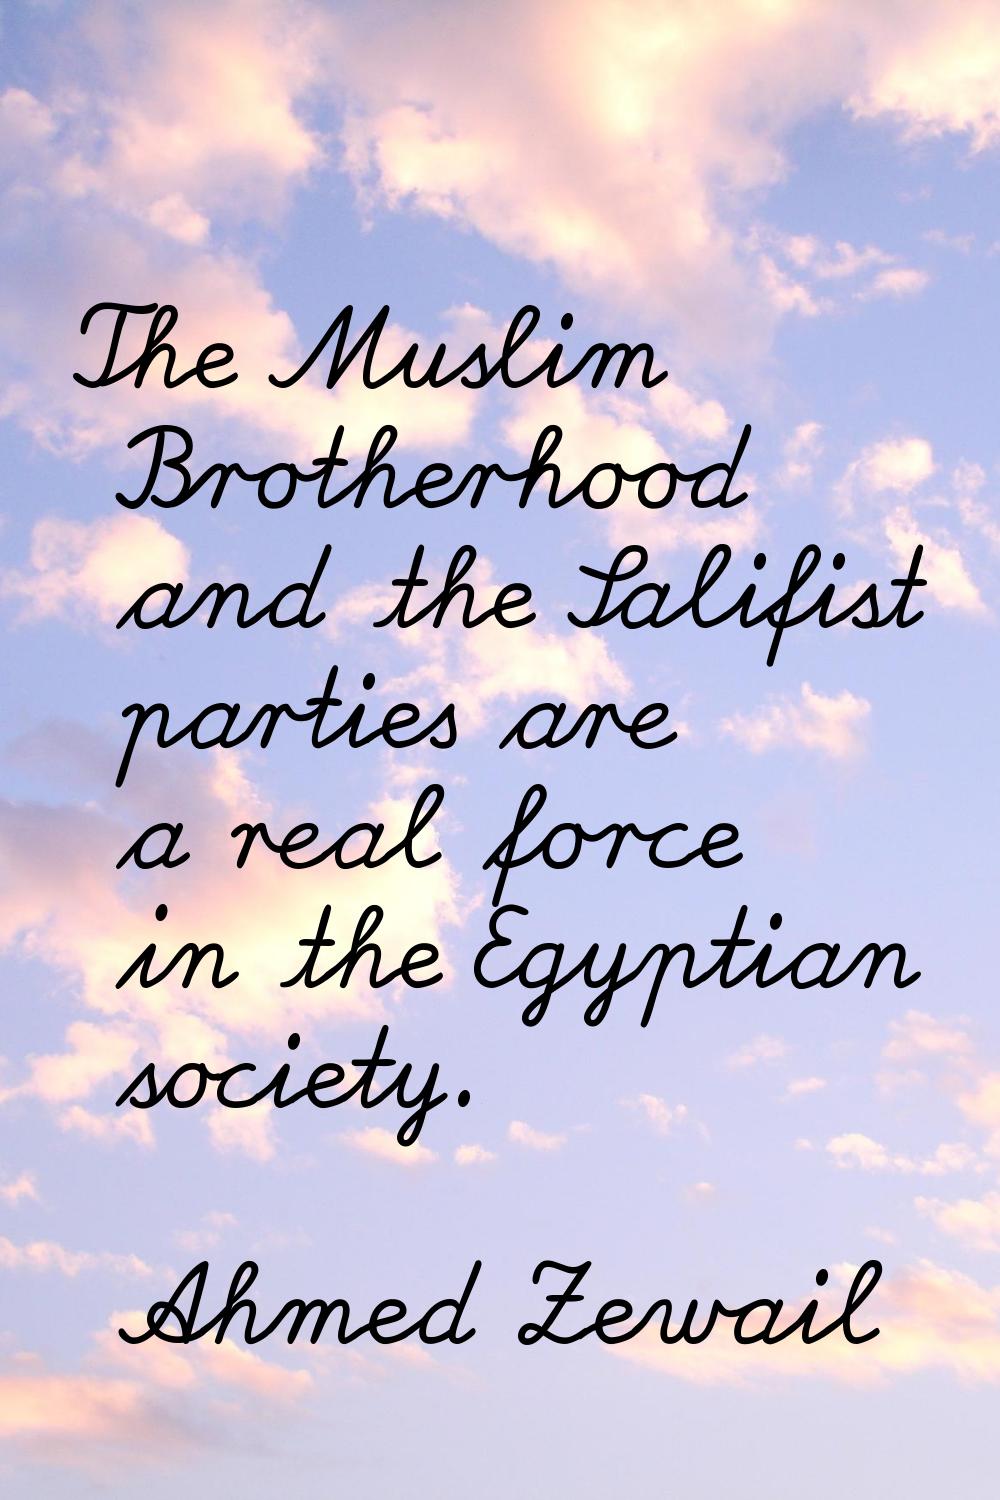 The Muslim Brotherhood and the Salifist parties are a real force in the Egyptian society.